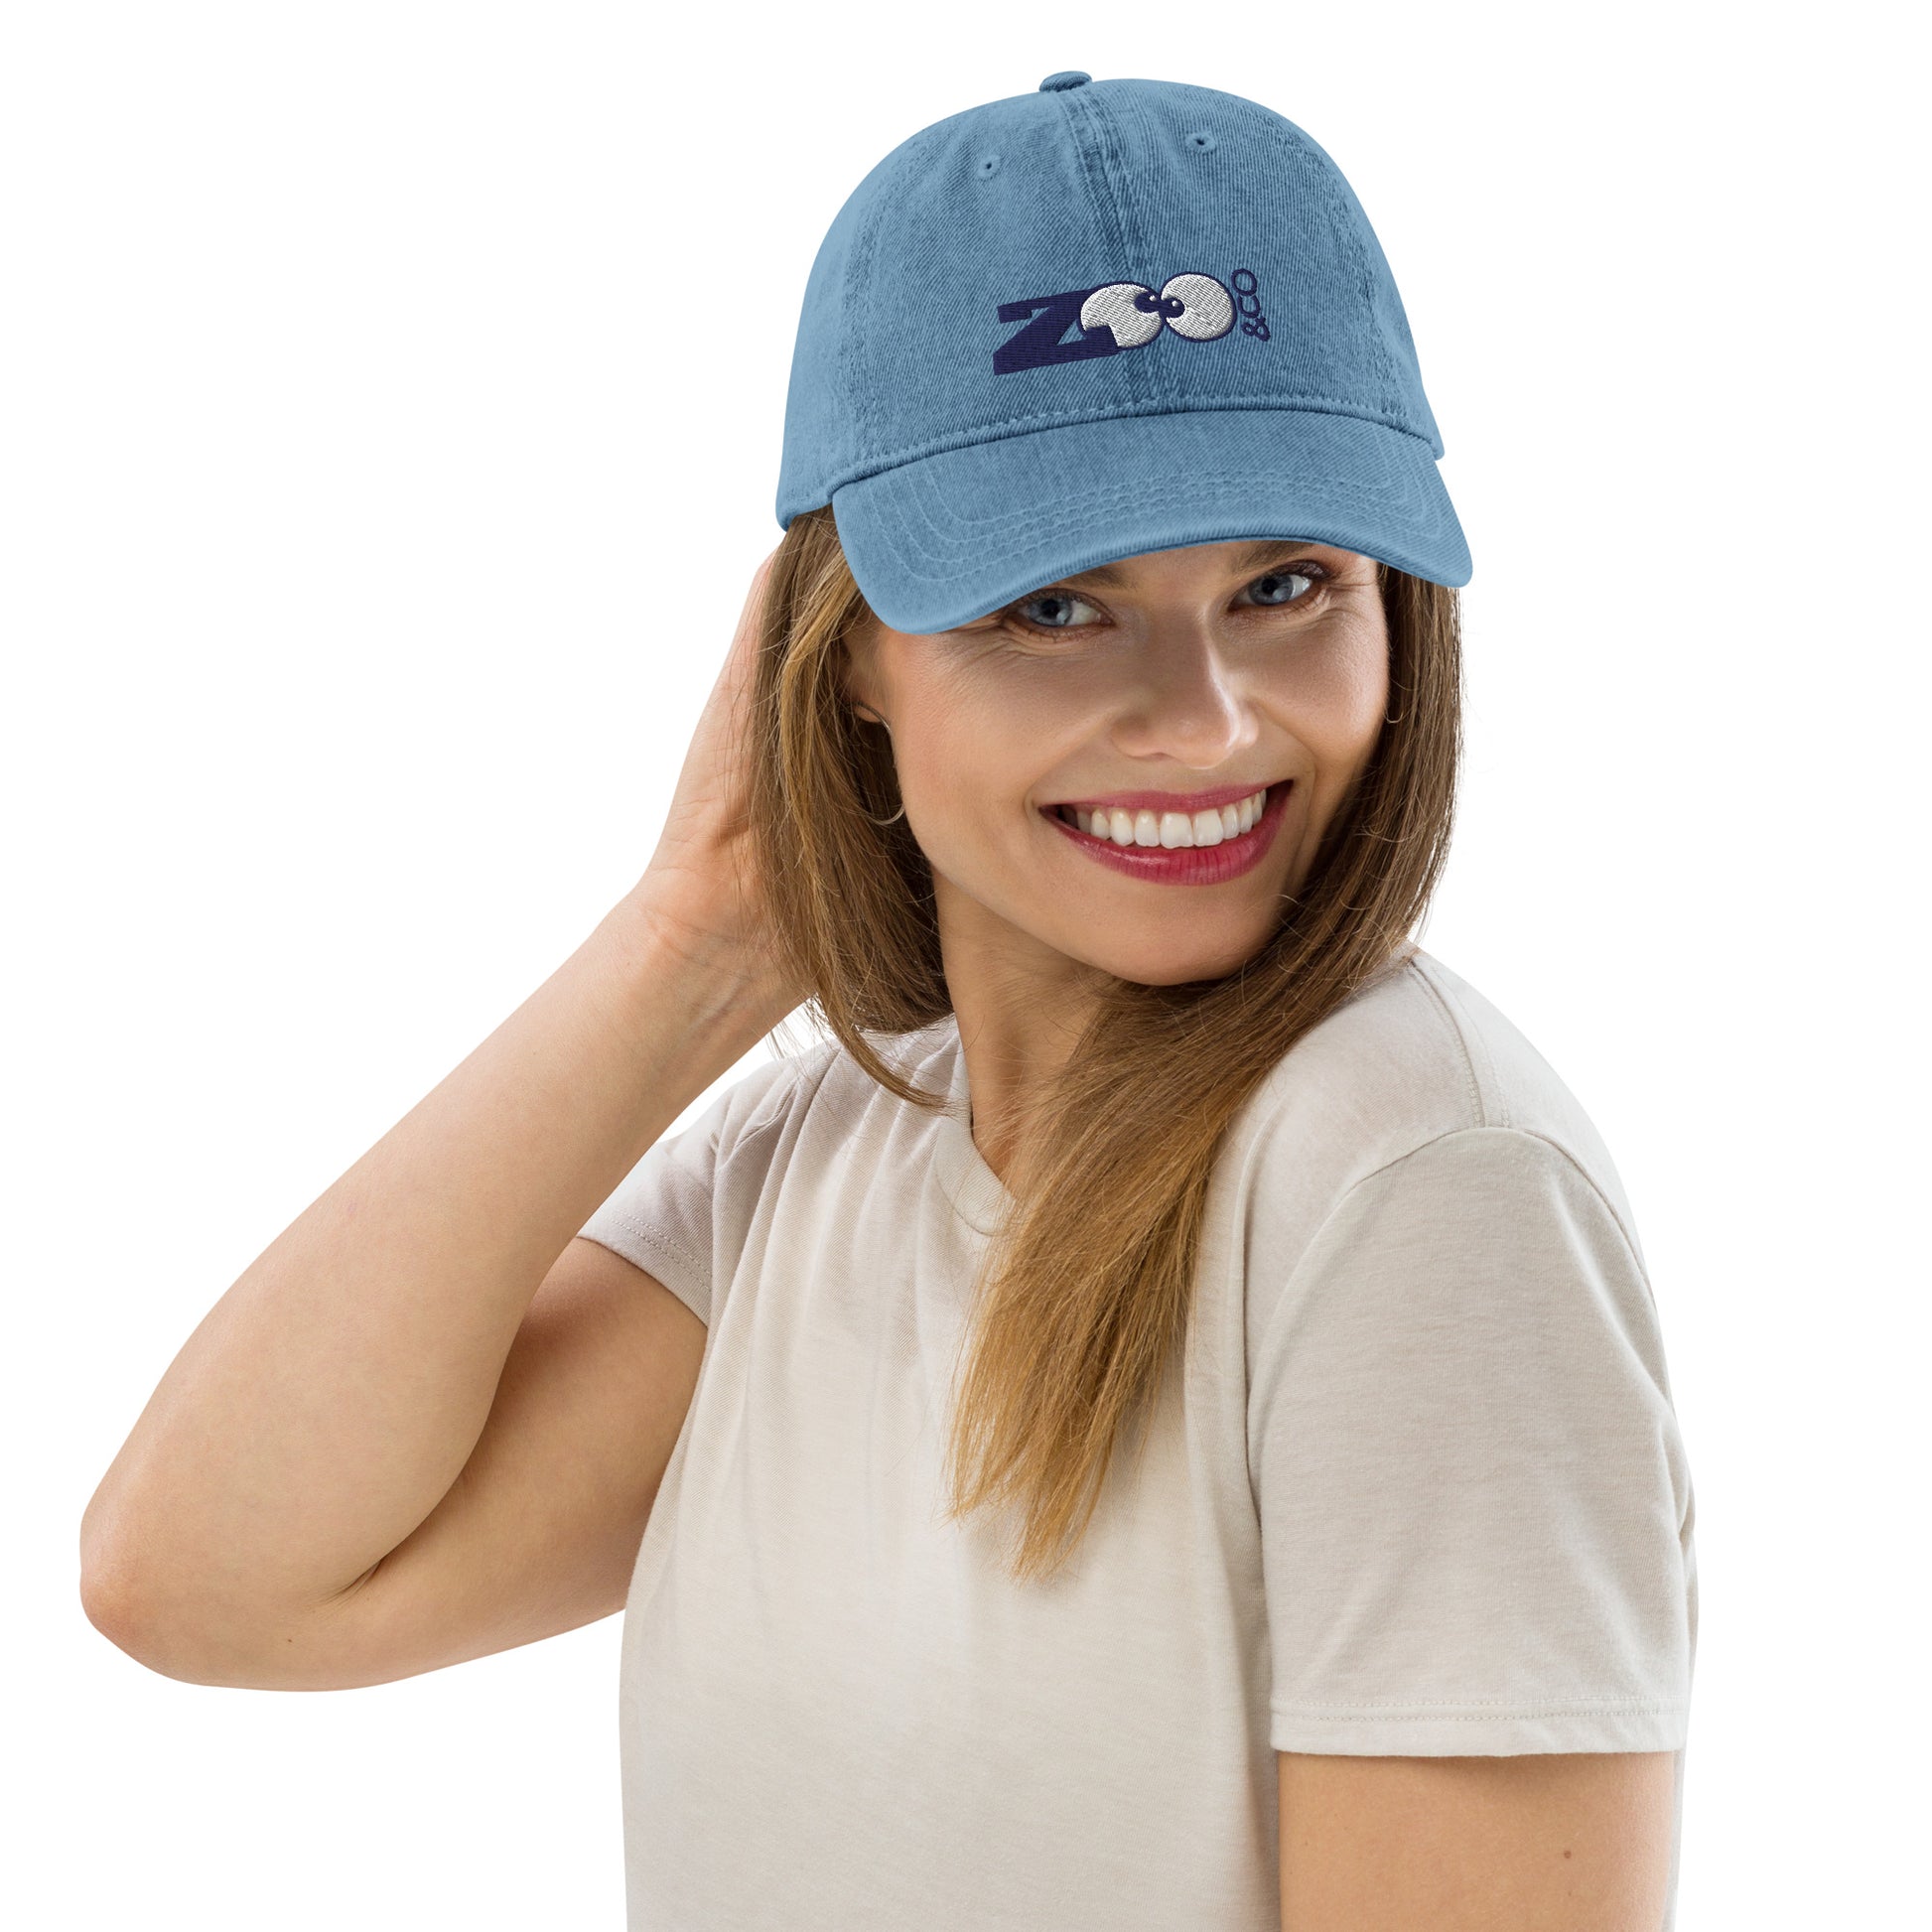 Smiling woman wearing Blue Denim Hat embroidered with Zoo&co's logo